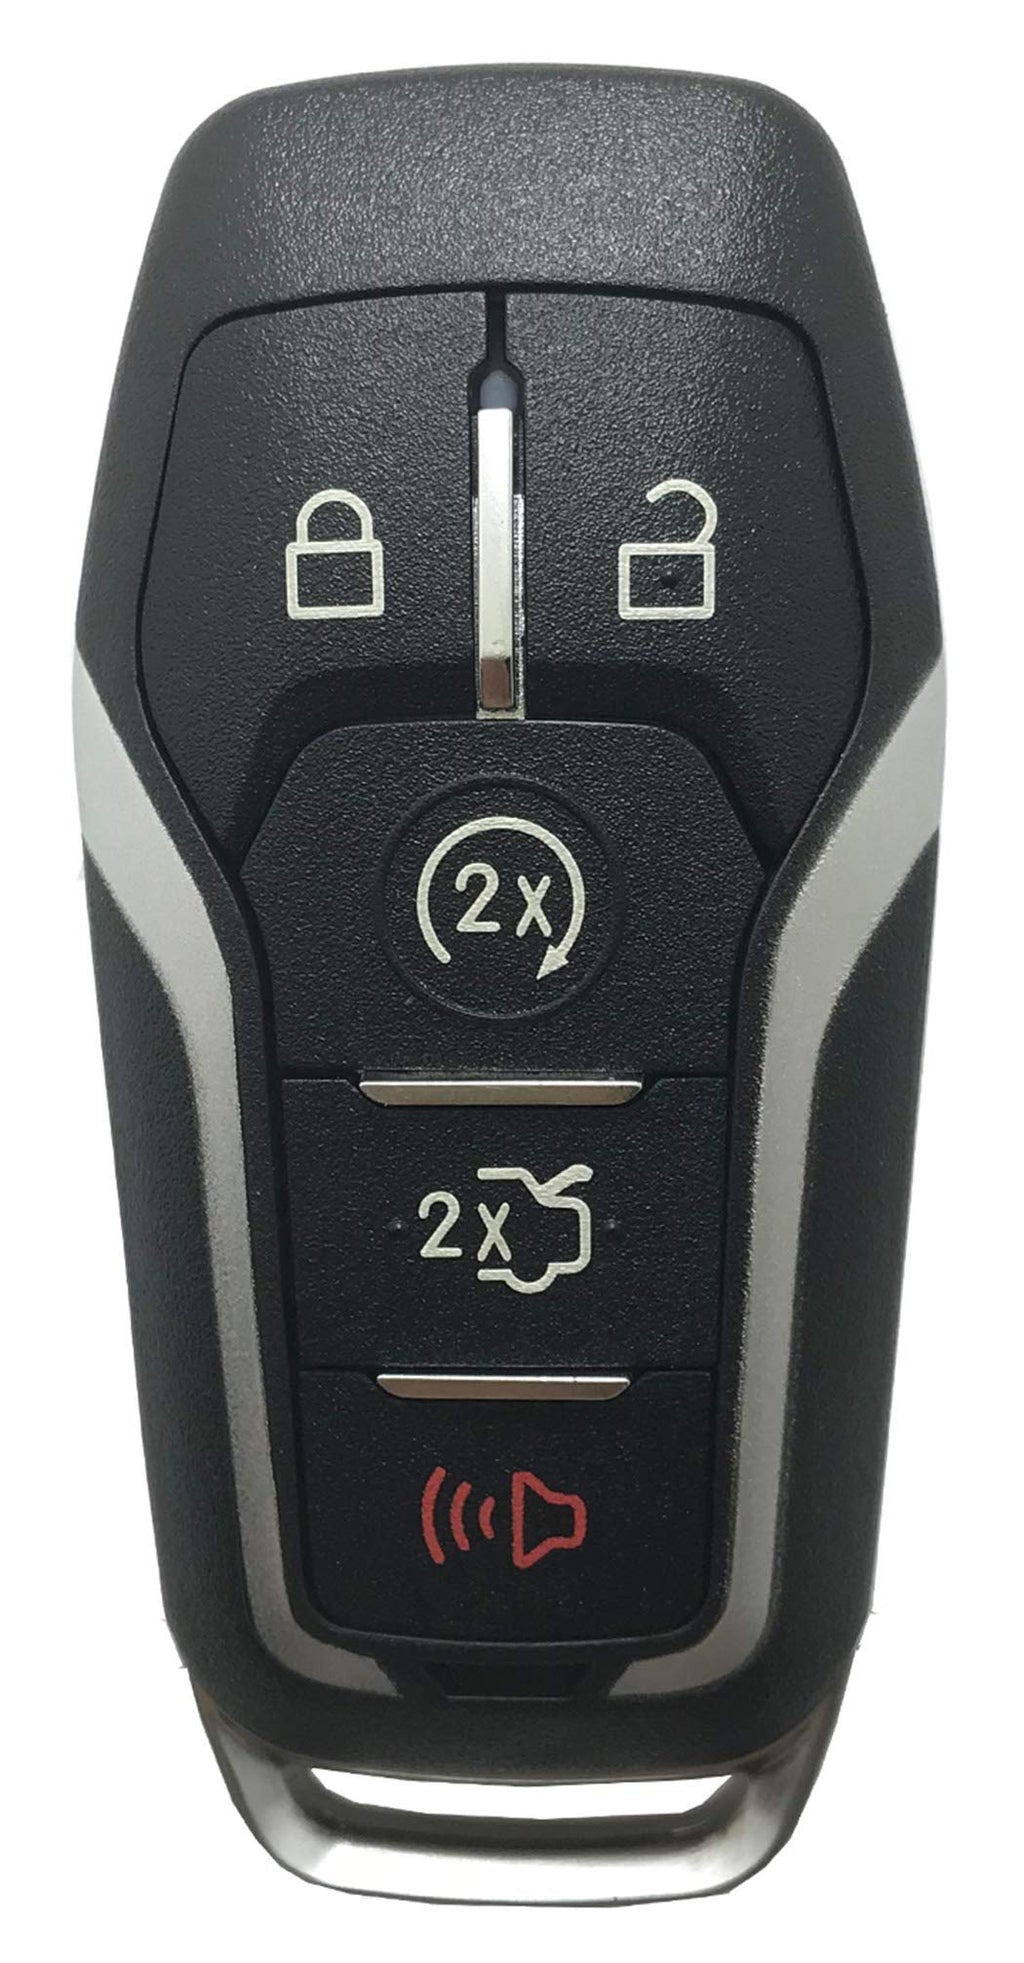  [AUSTRALIA] - Smart Key Fob Shell Case Fit for Ford Fusion Mustang Explorer Edge 5 Buttons Keyless Entry Remote Key Fob Cover Housing (Black) Black